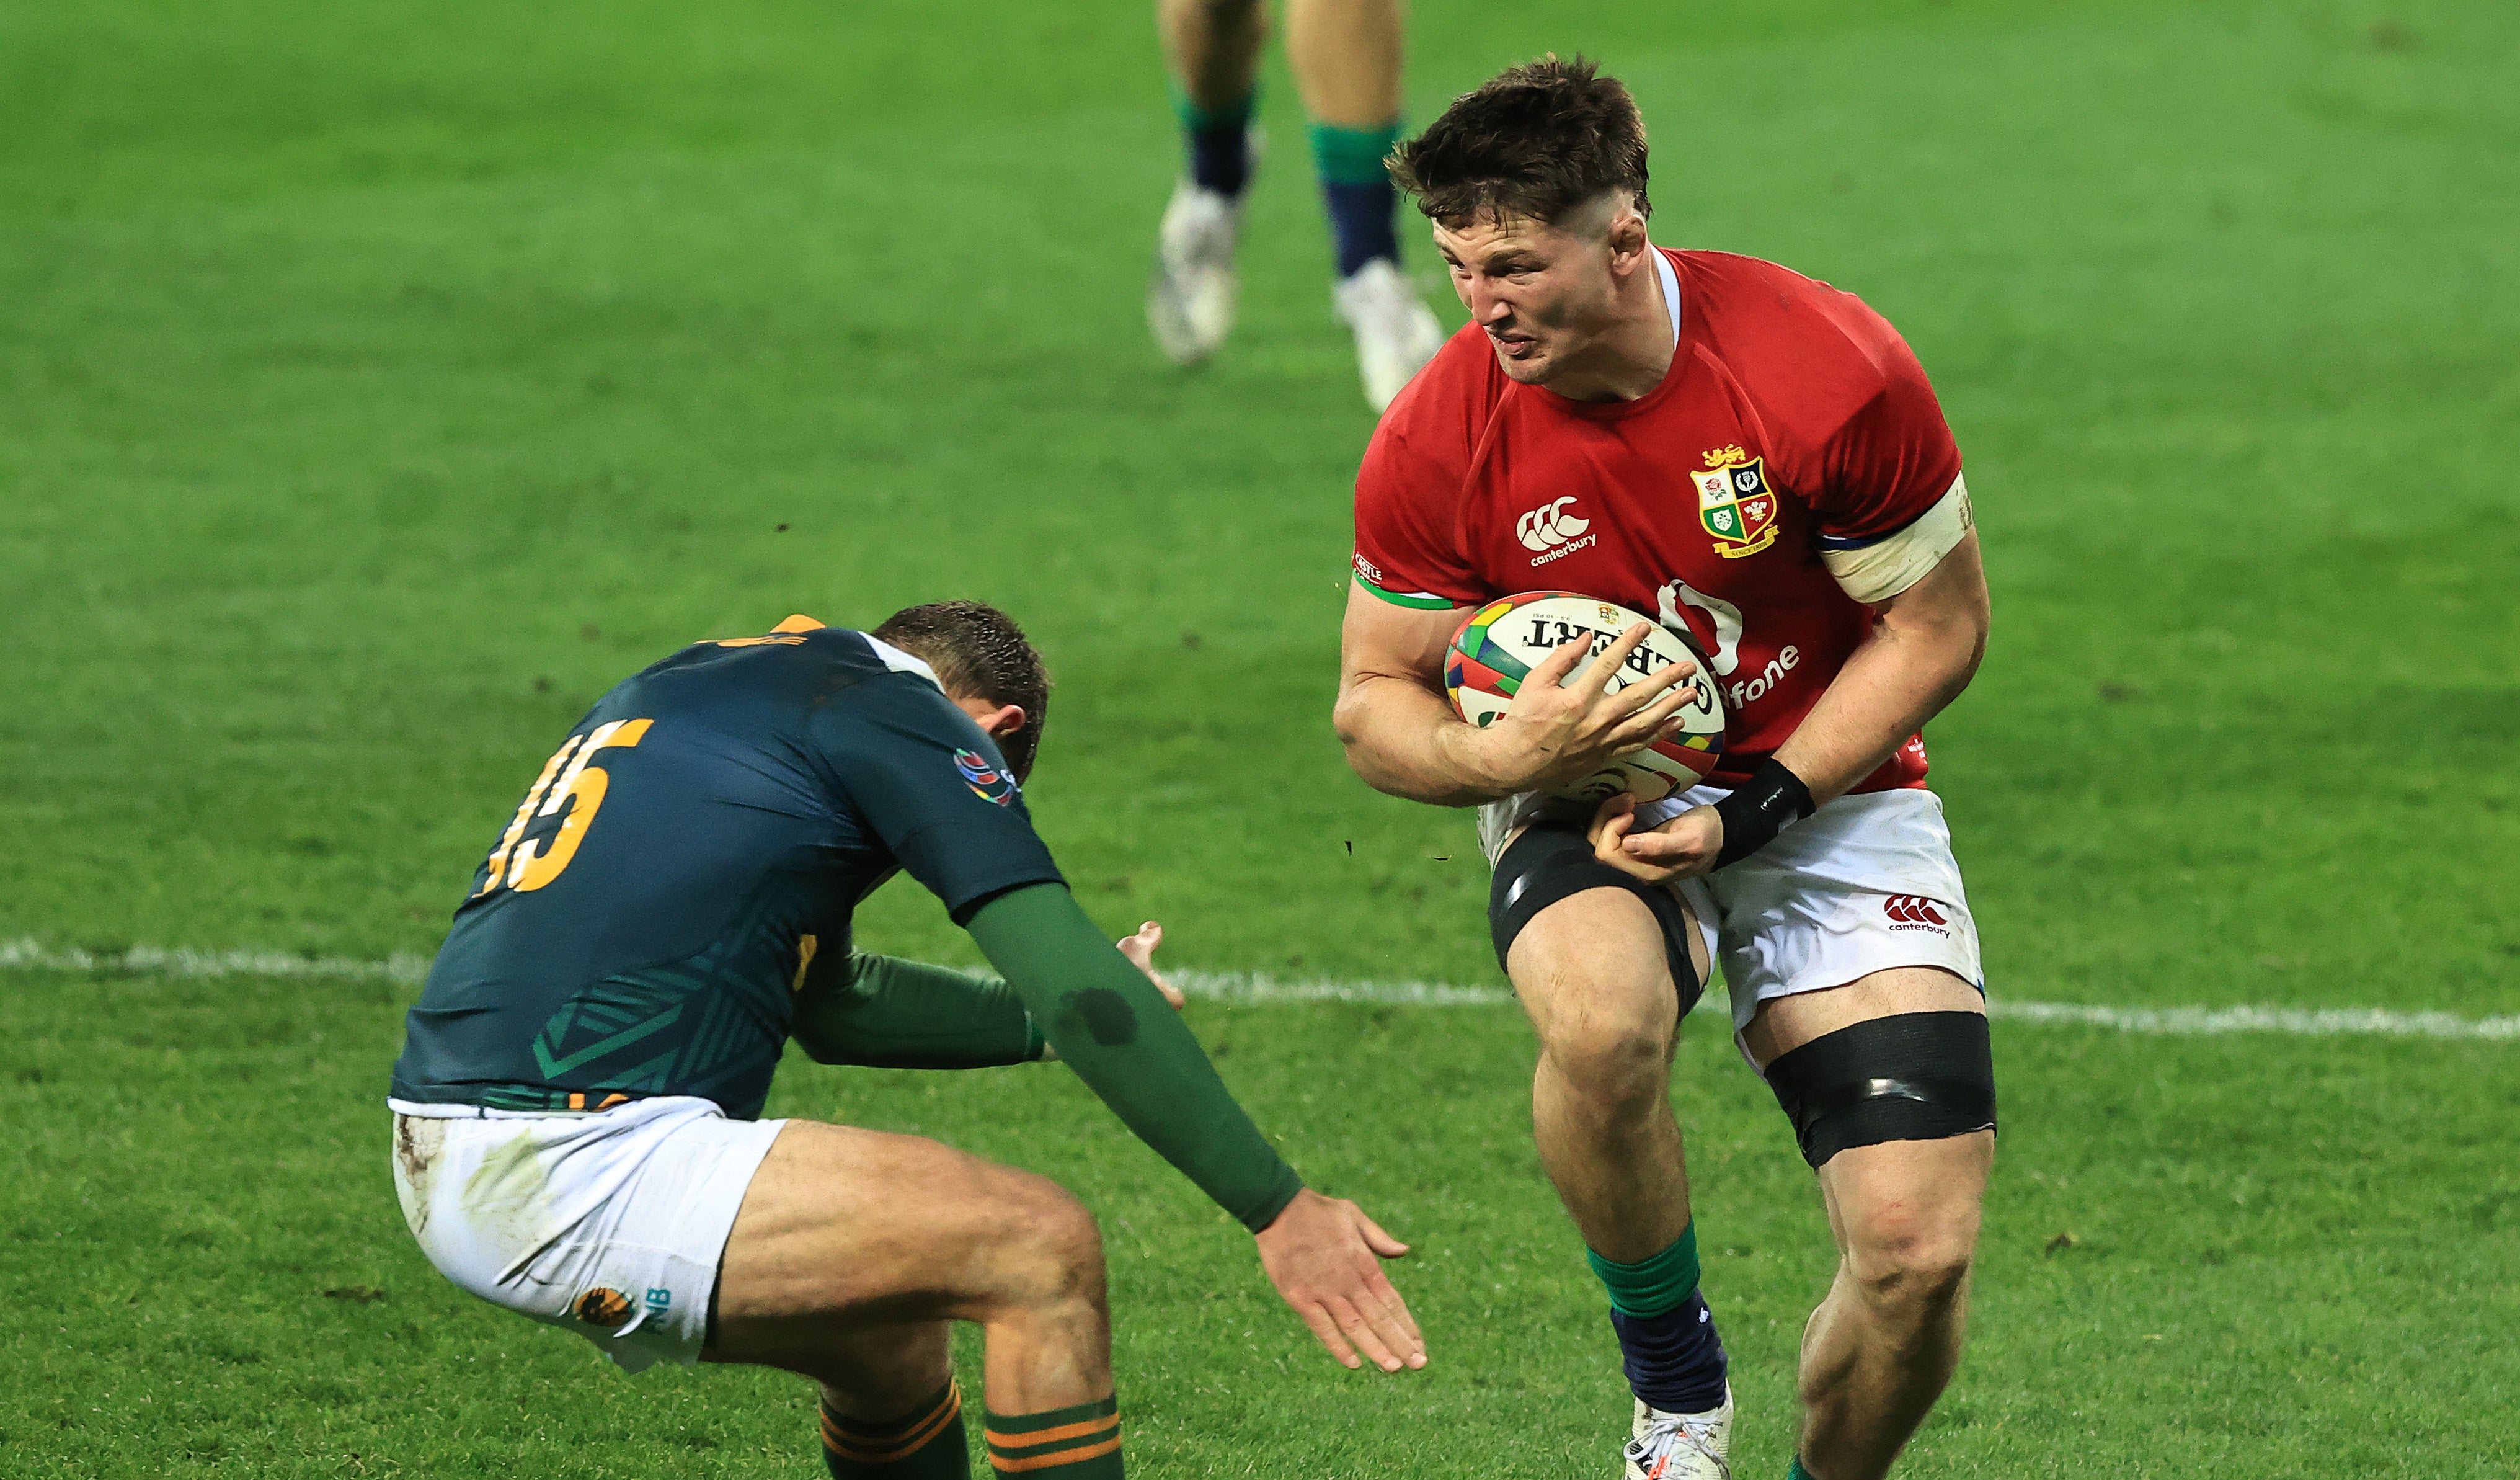 Curry started all three British and Irish Lions Tests in South Africa